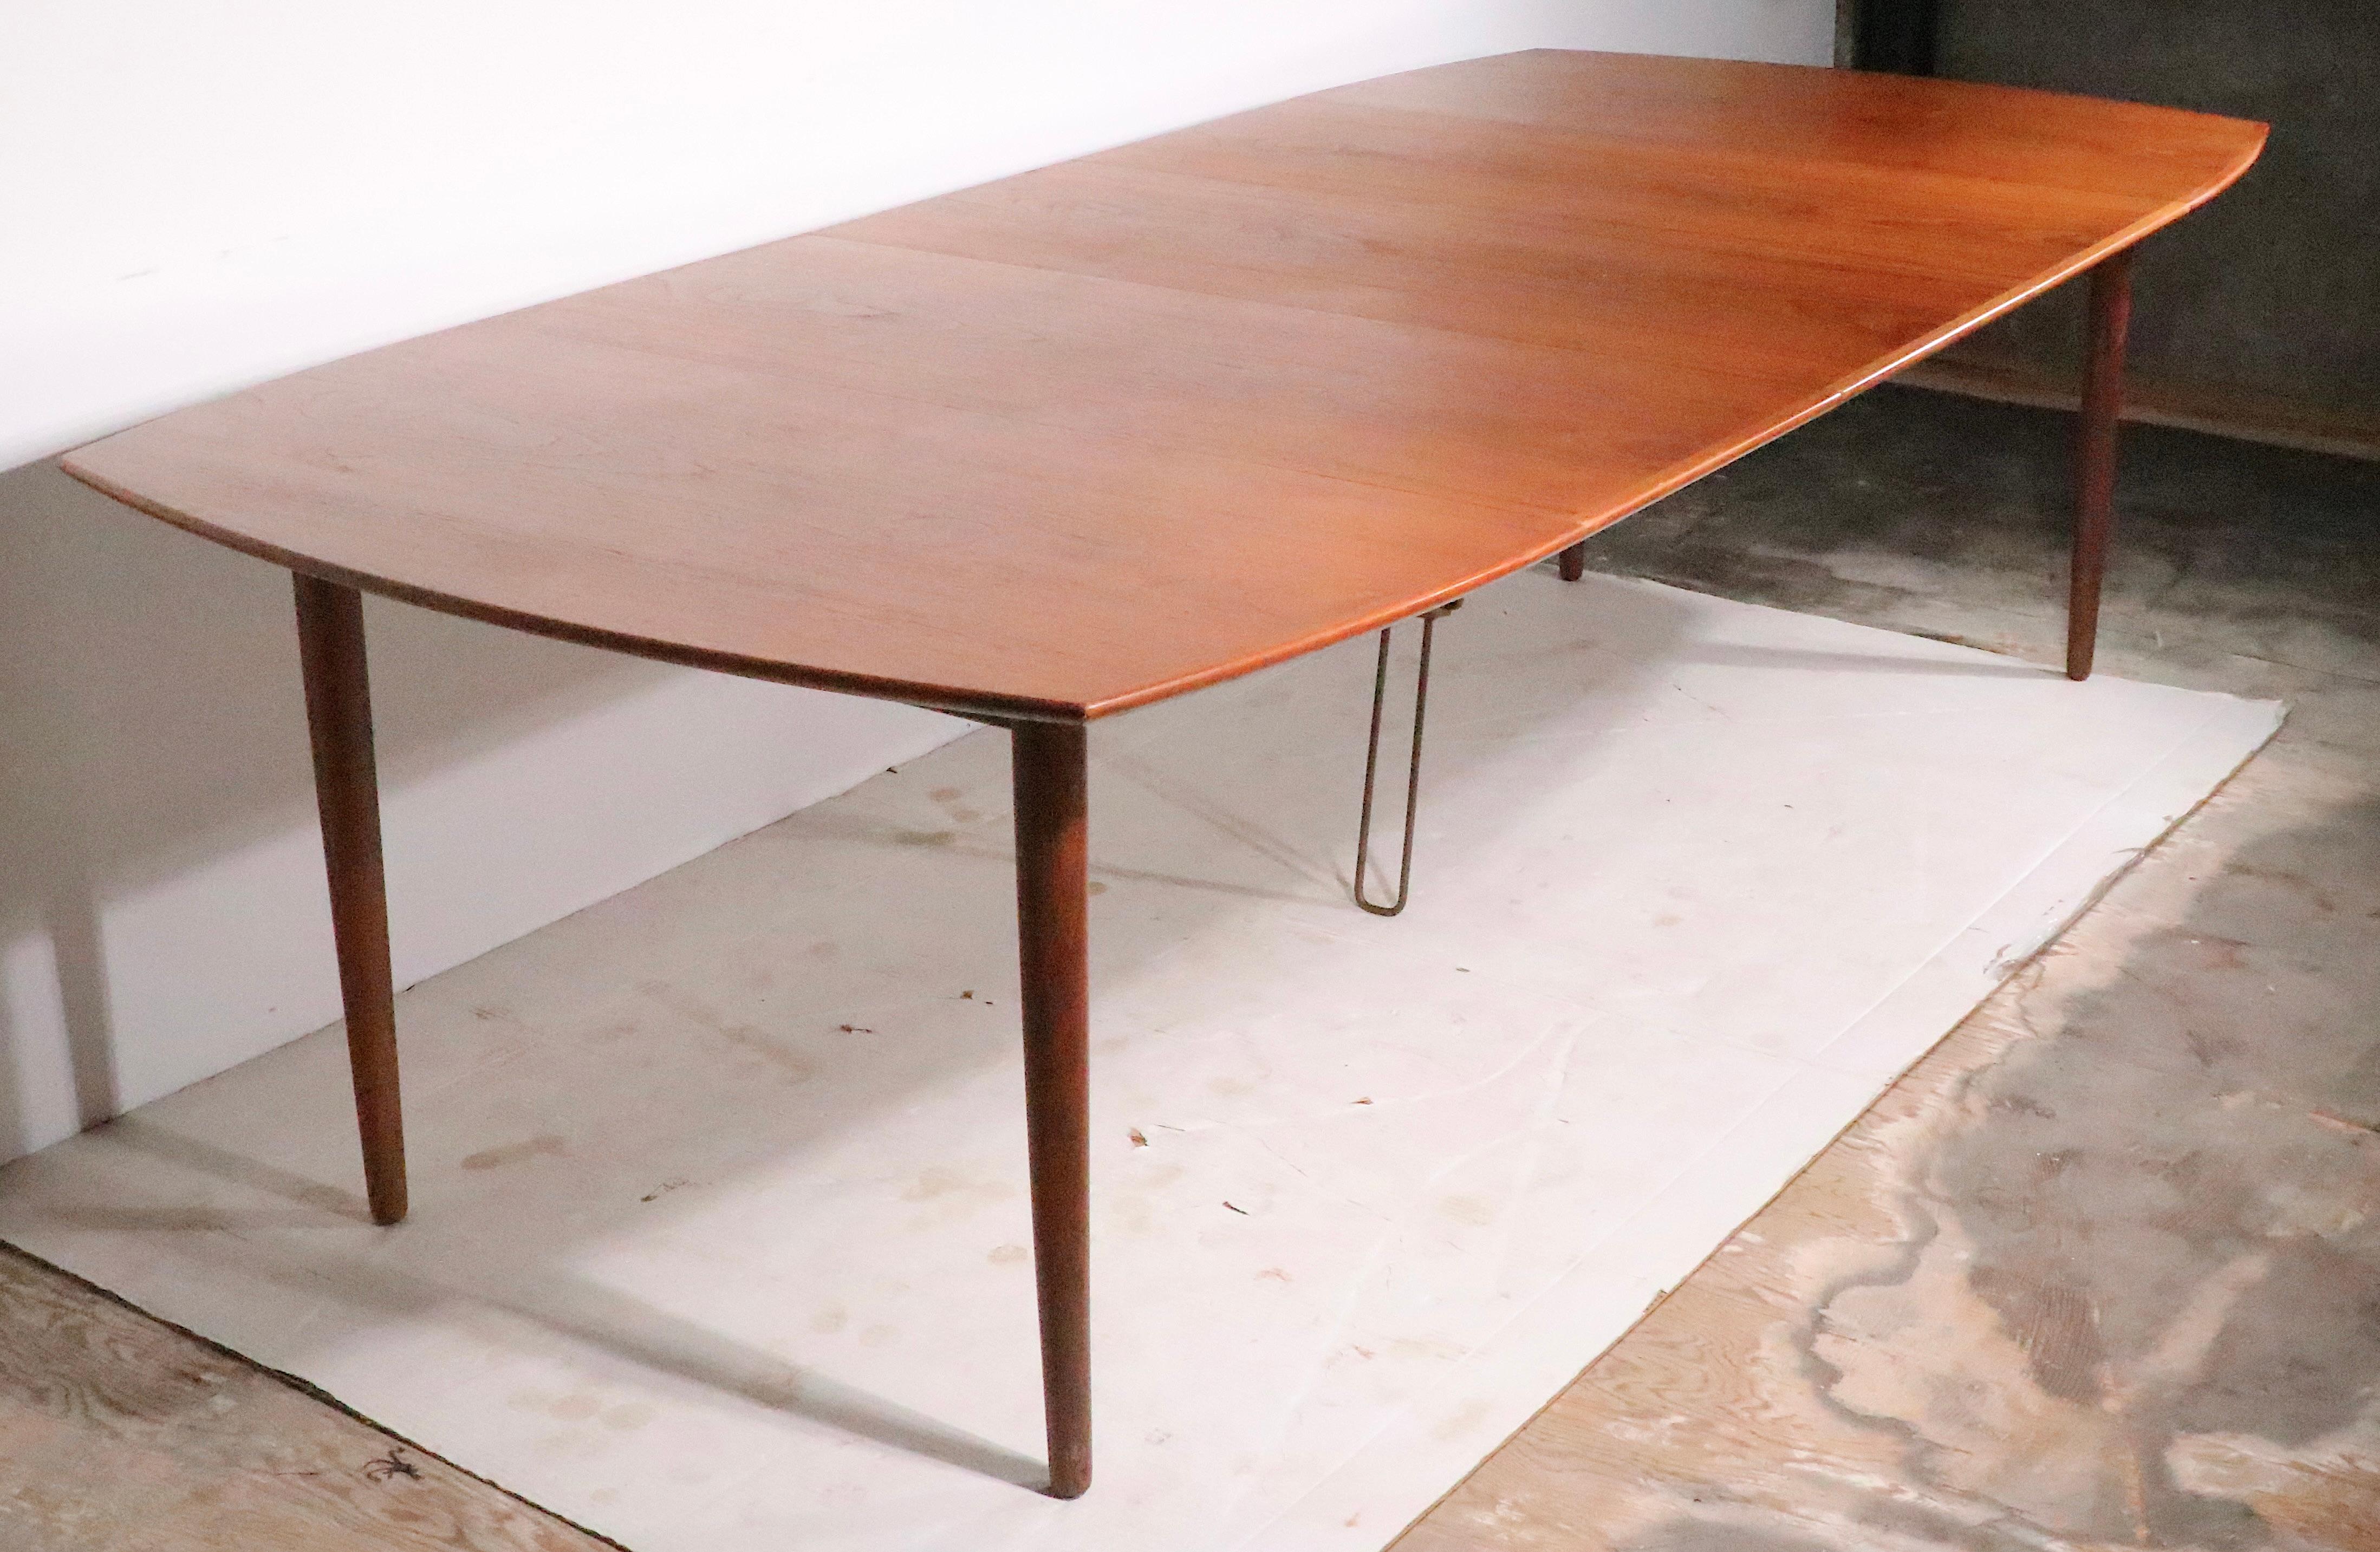 Exceptional  Danish Mid Century Modern teak dining table with 3 leaves. Designed by H. W. Klein, for Bramin Mobler, this example  is in very good, original condition, showing only light cosmetic wear, normal and consistent with age.
 The table